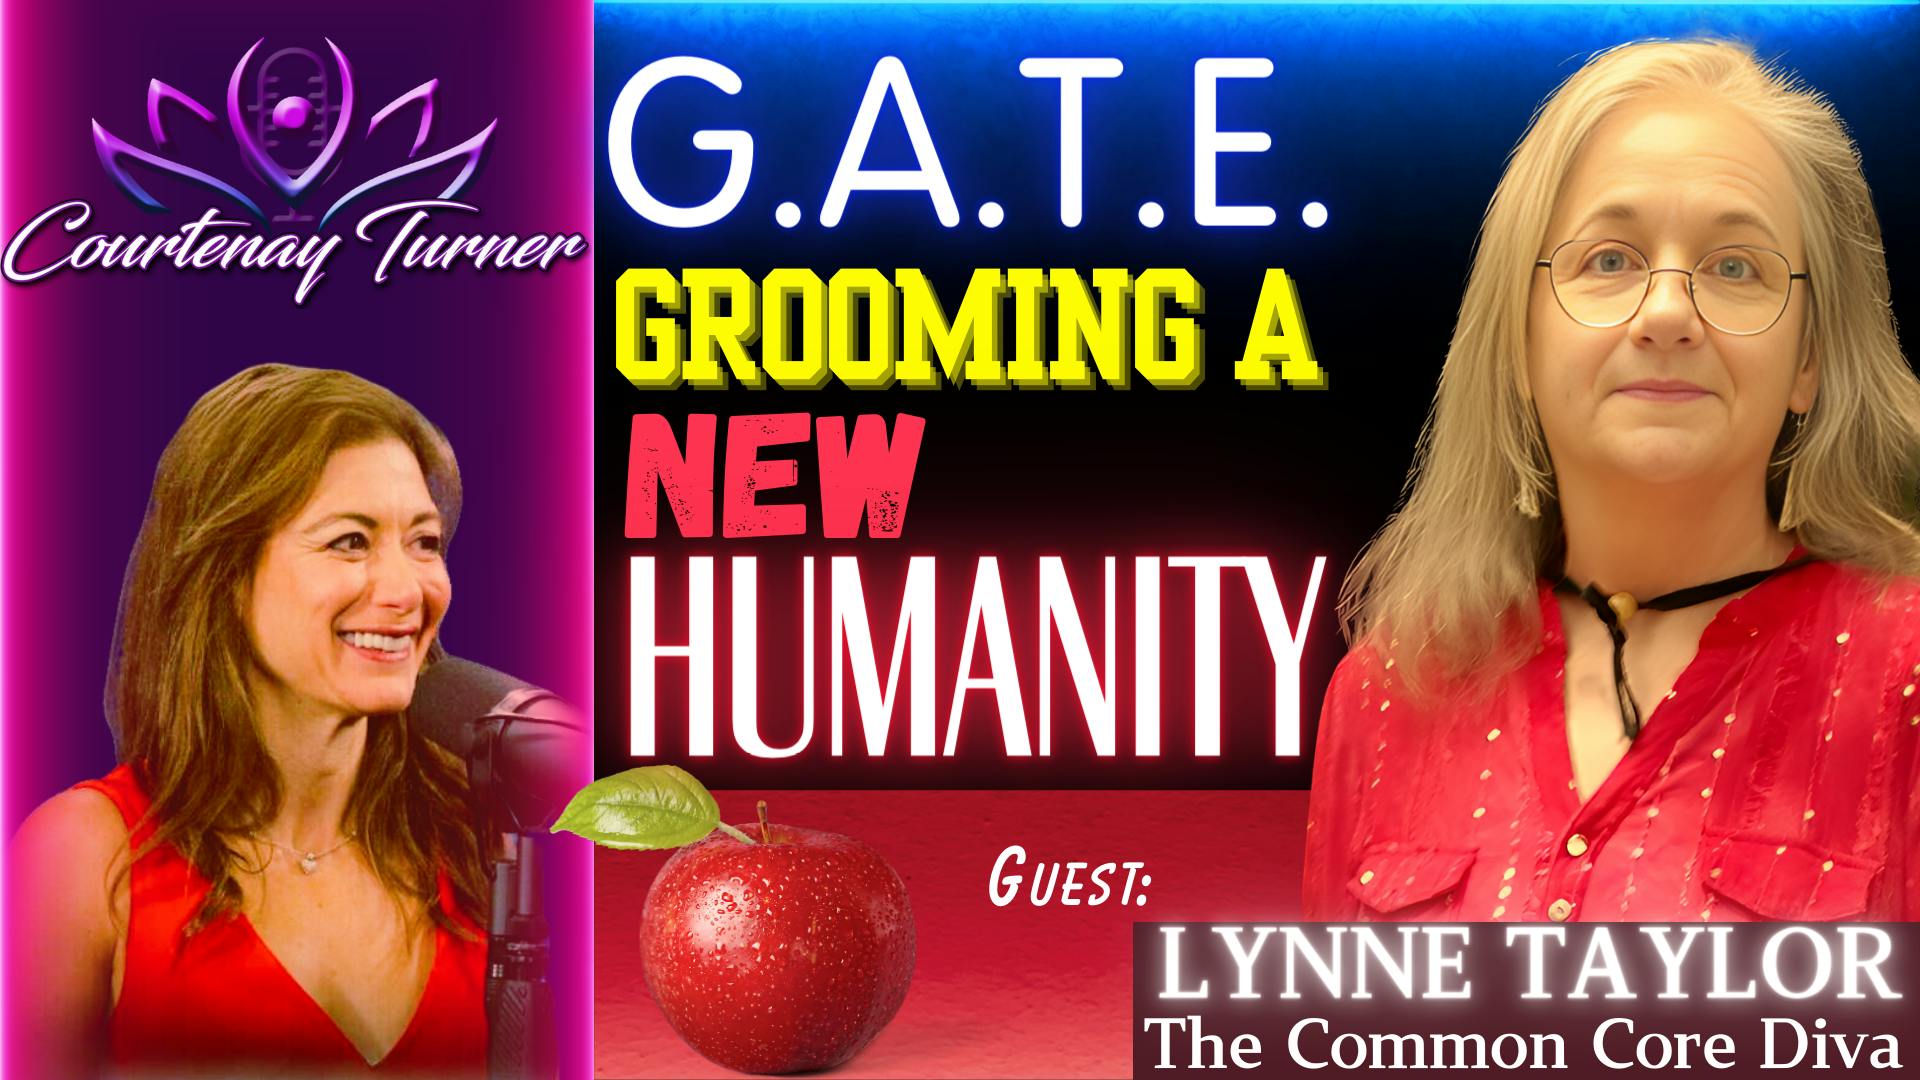 Ep.404: G.A.T.E. Grooming A New Humanity? w/ Lynne Taylor | The Courtenay Turner Podcast